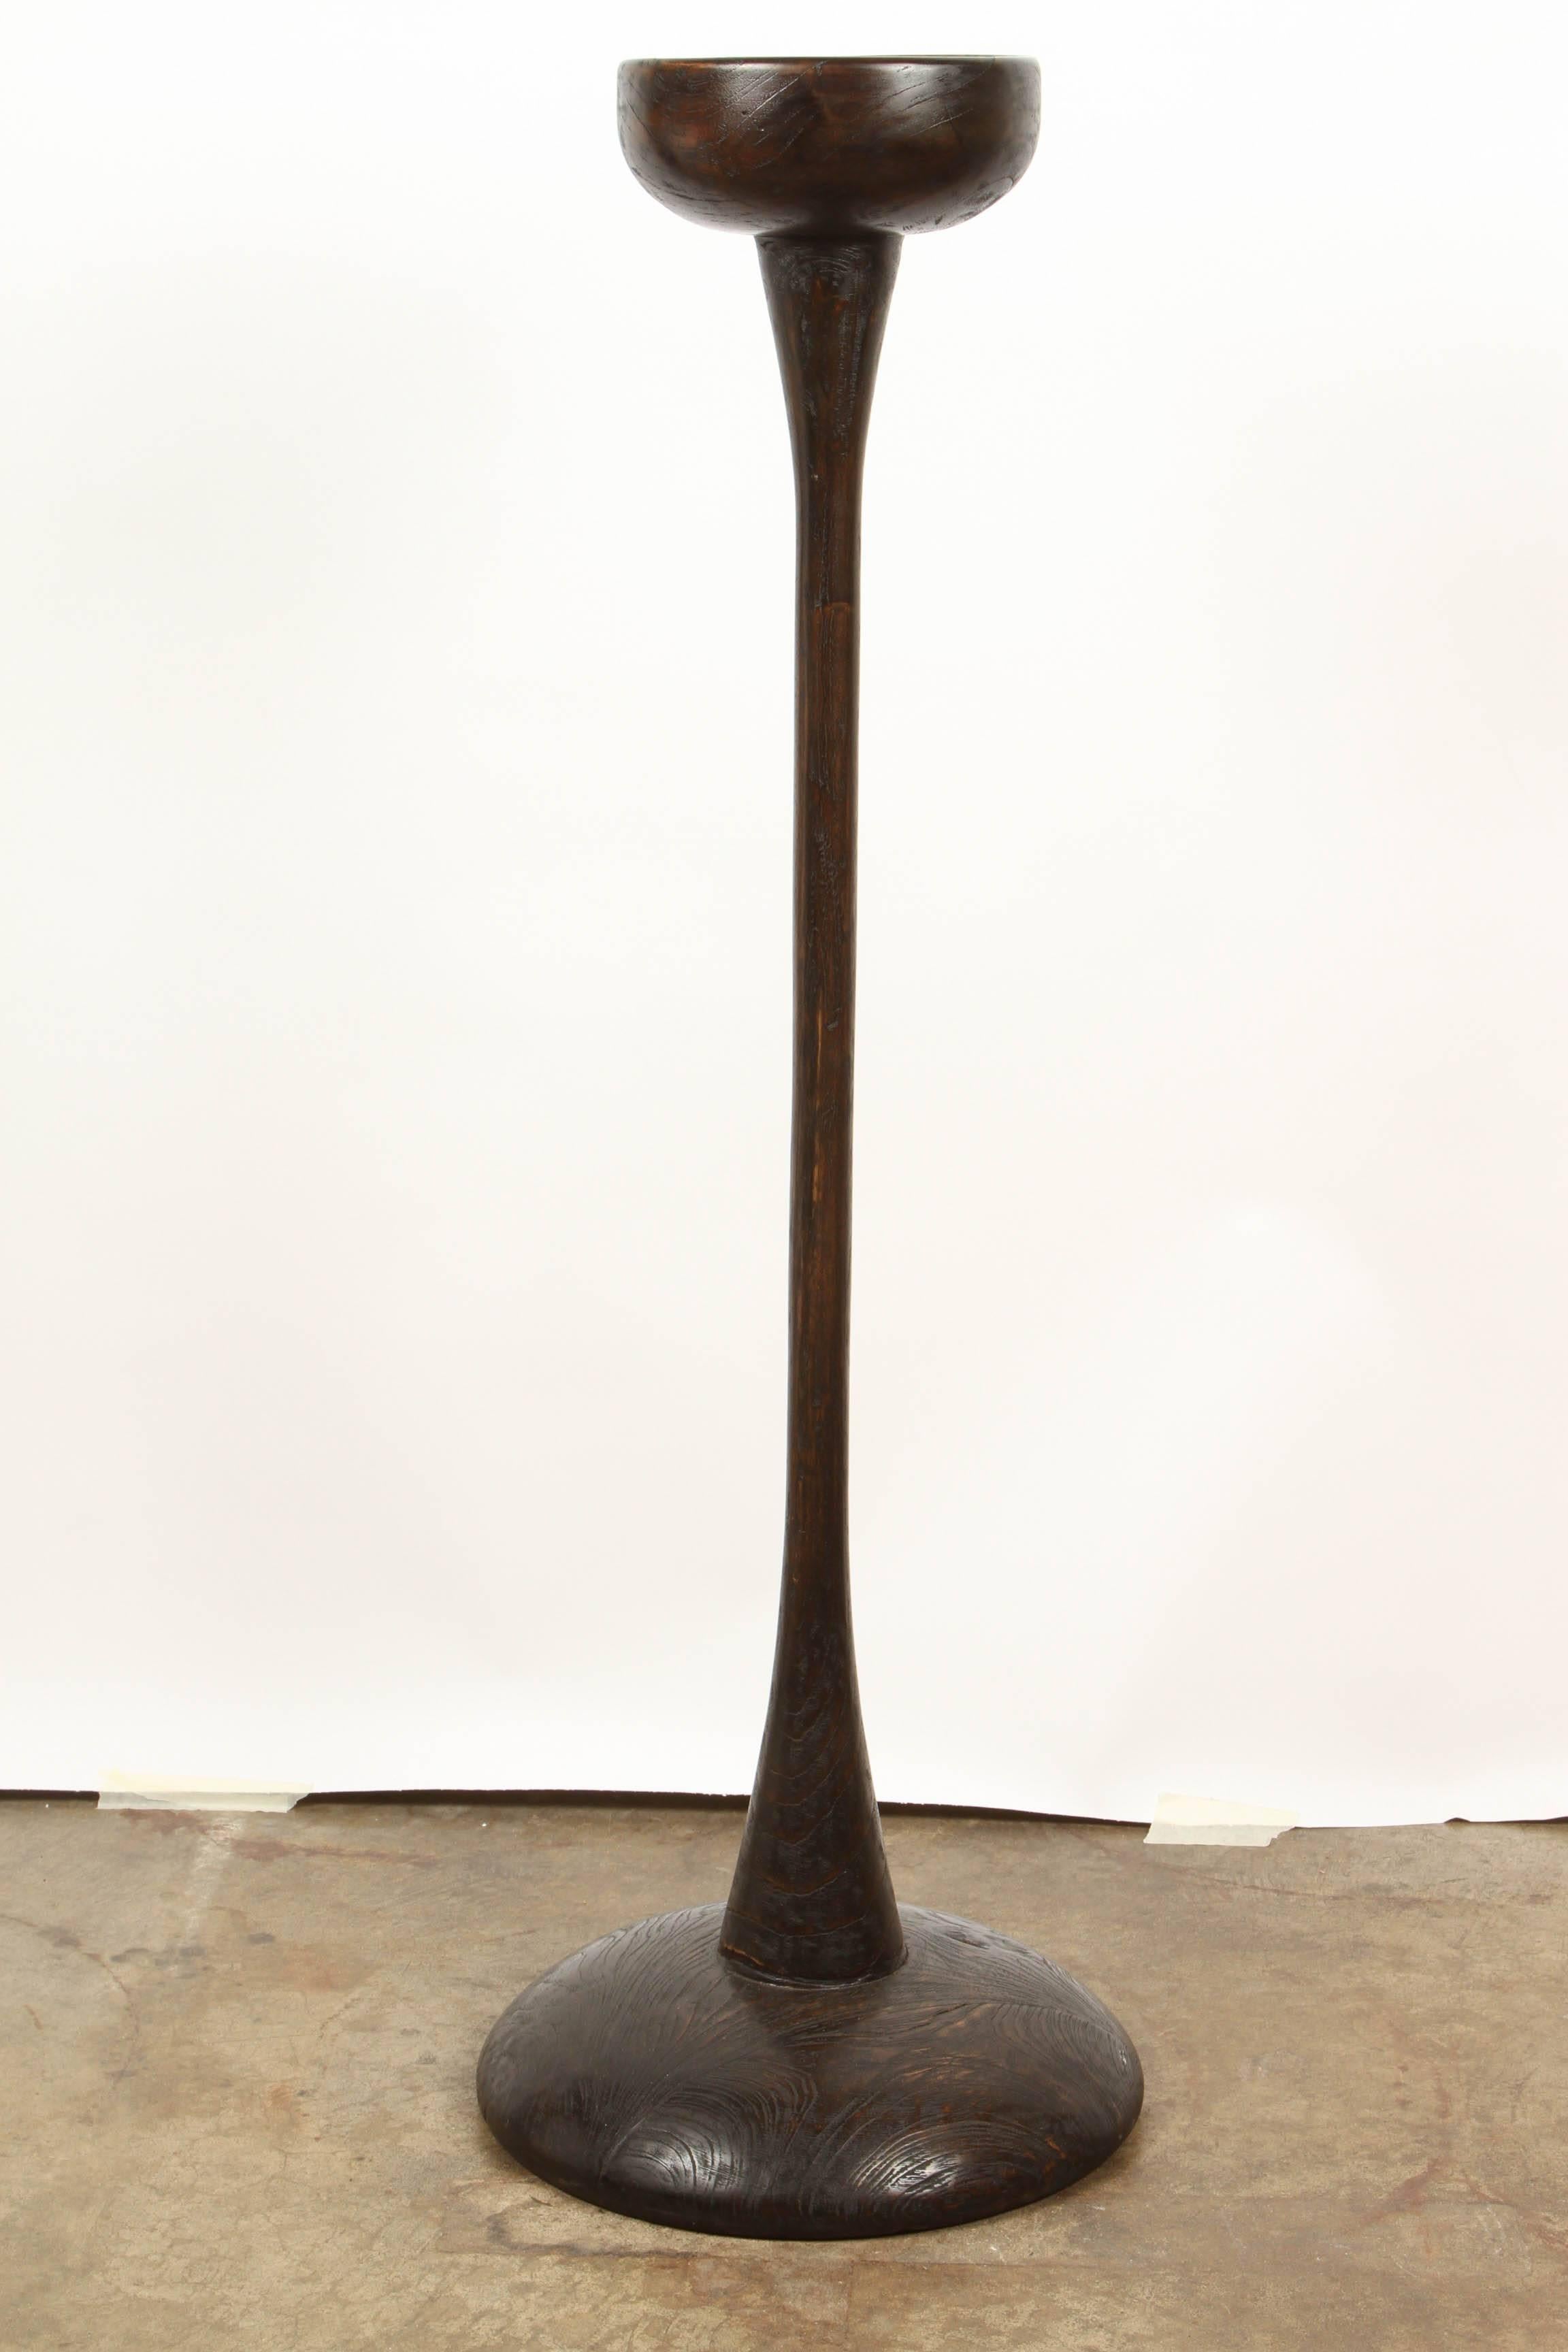 A pair of tall (46 1/2 inches) solid teak central Java plant stands, each with a deep black patina. The base upon which the plant sits rises from a graceful pillar that in turn rises from a rounded base. A plant that grows straight up would be